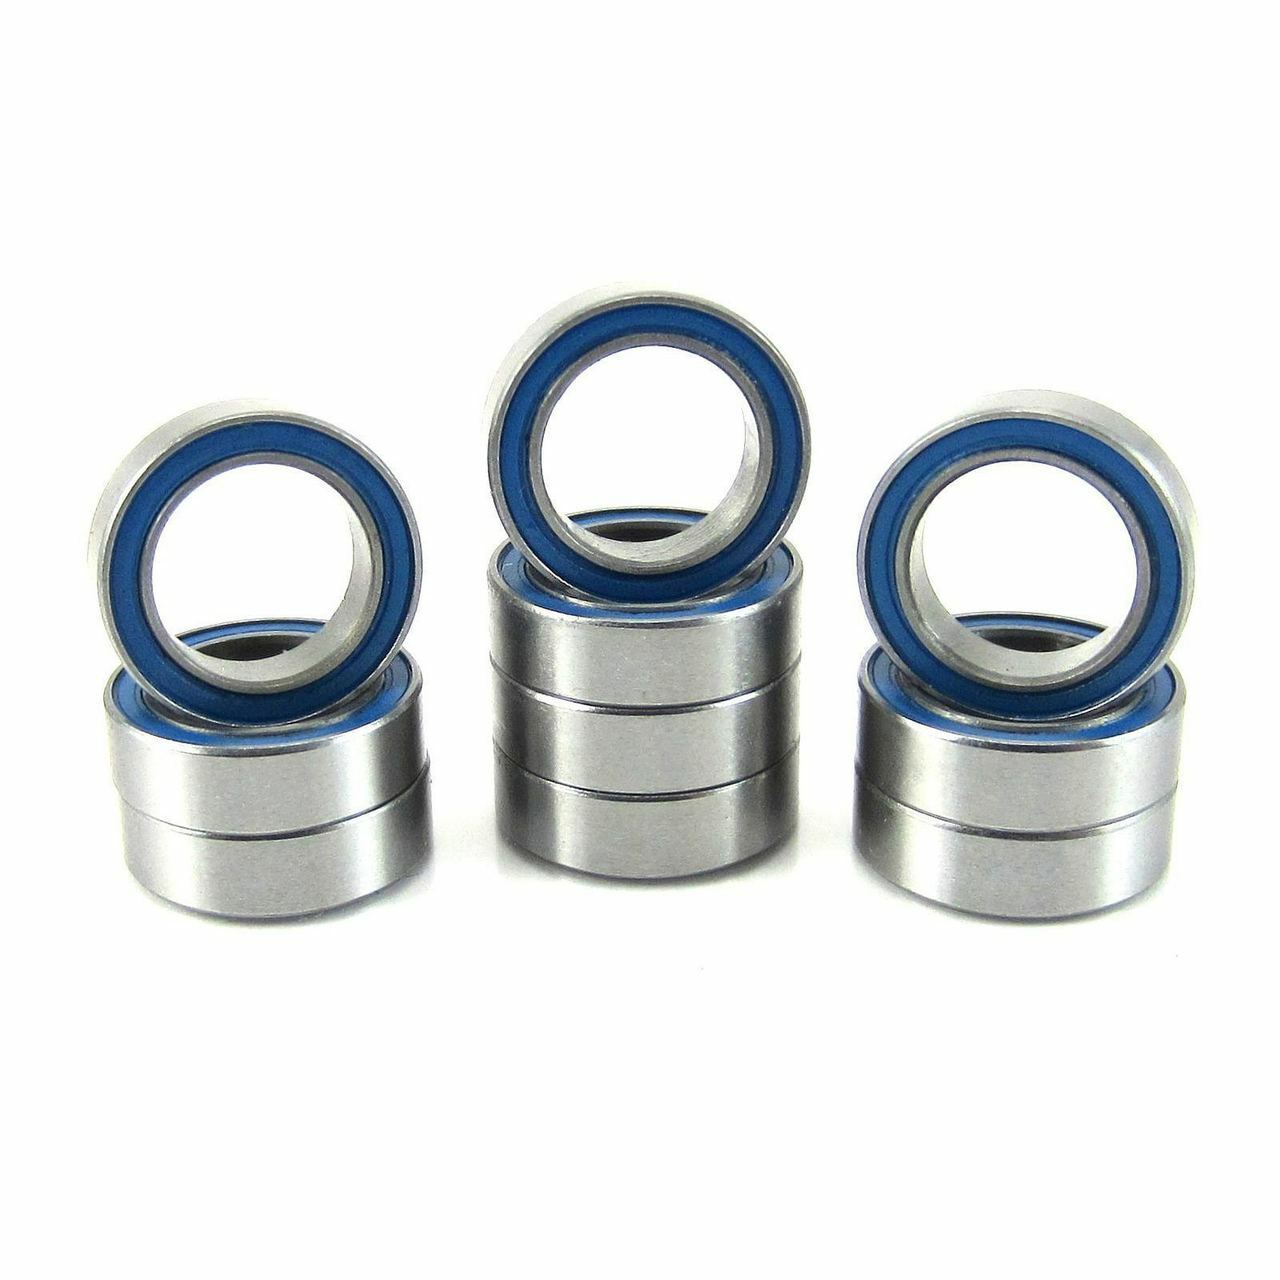 MR128-2RS 8x12x3.5 Precision High Speed RC Car Ball Bearing, Chrome Steel (GCr15) with Blue Rubber Seals ABEC-1 ABEC-3 ABEC-5